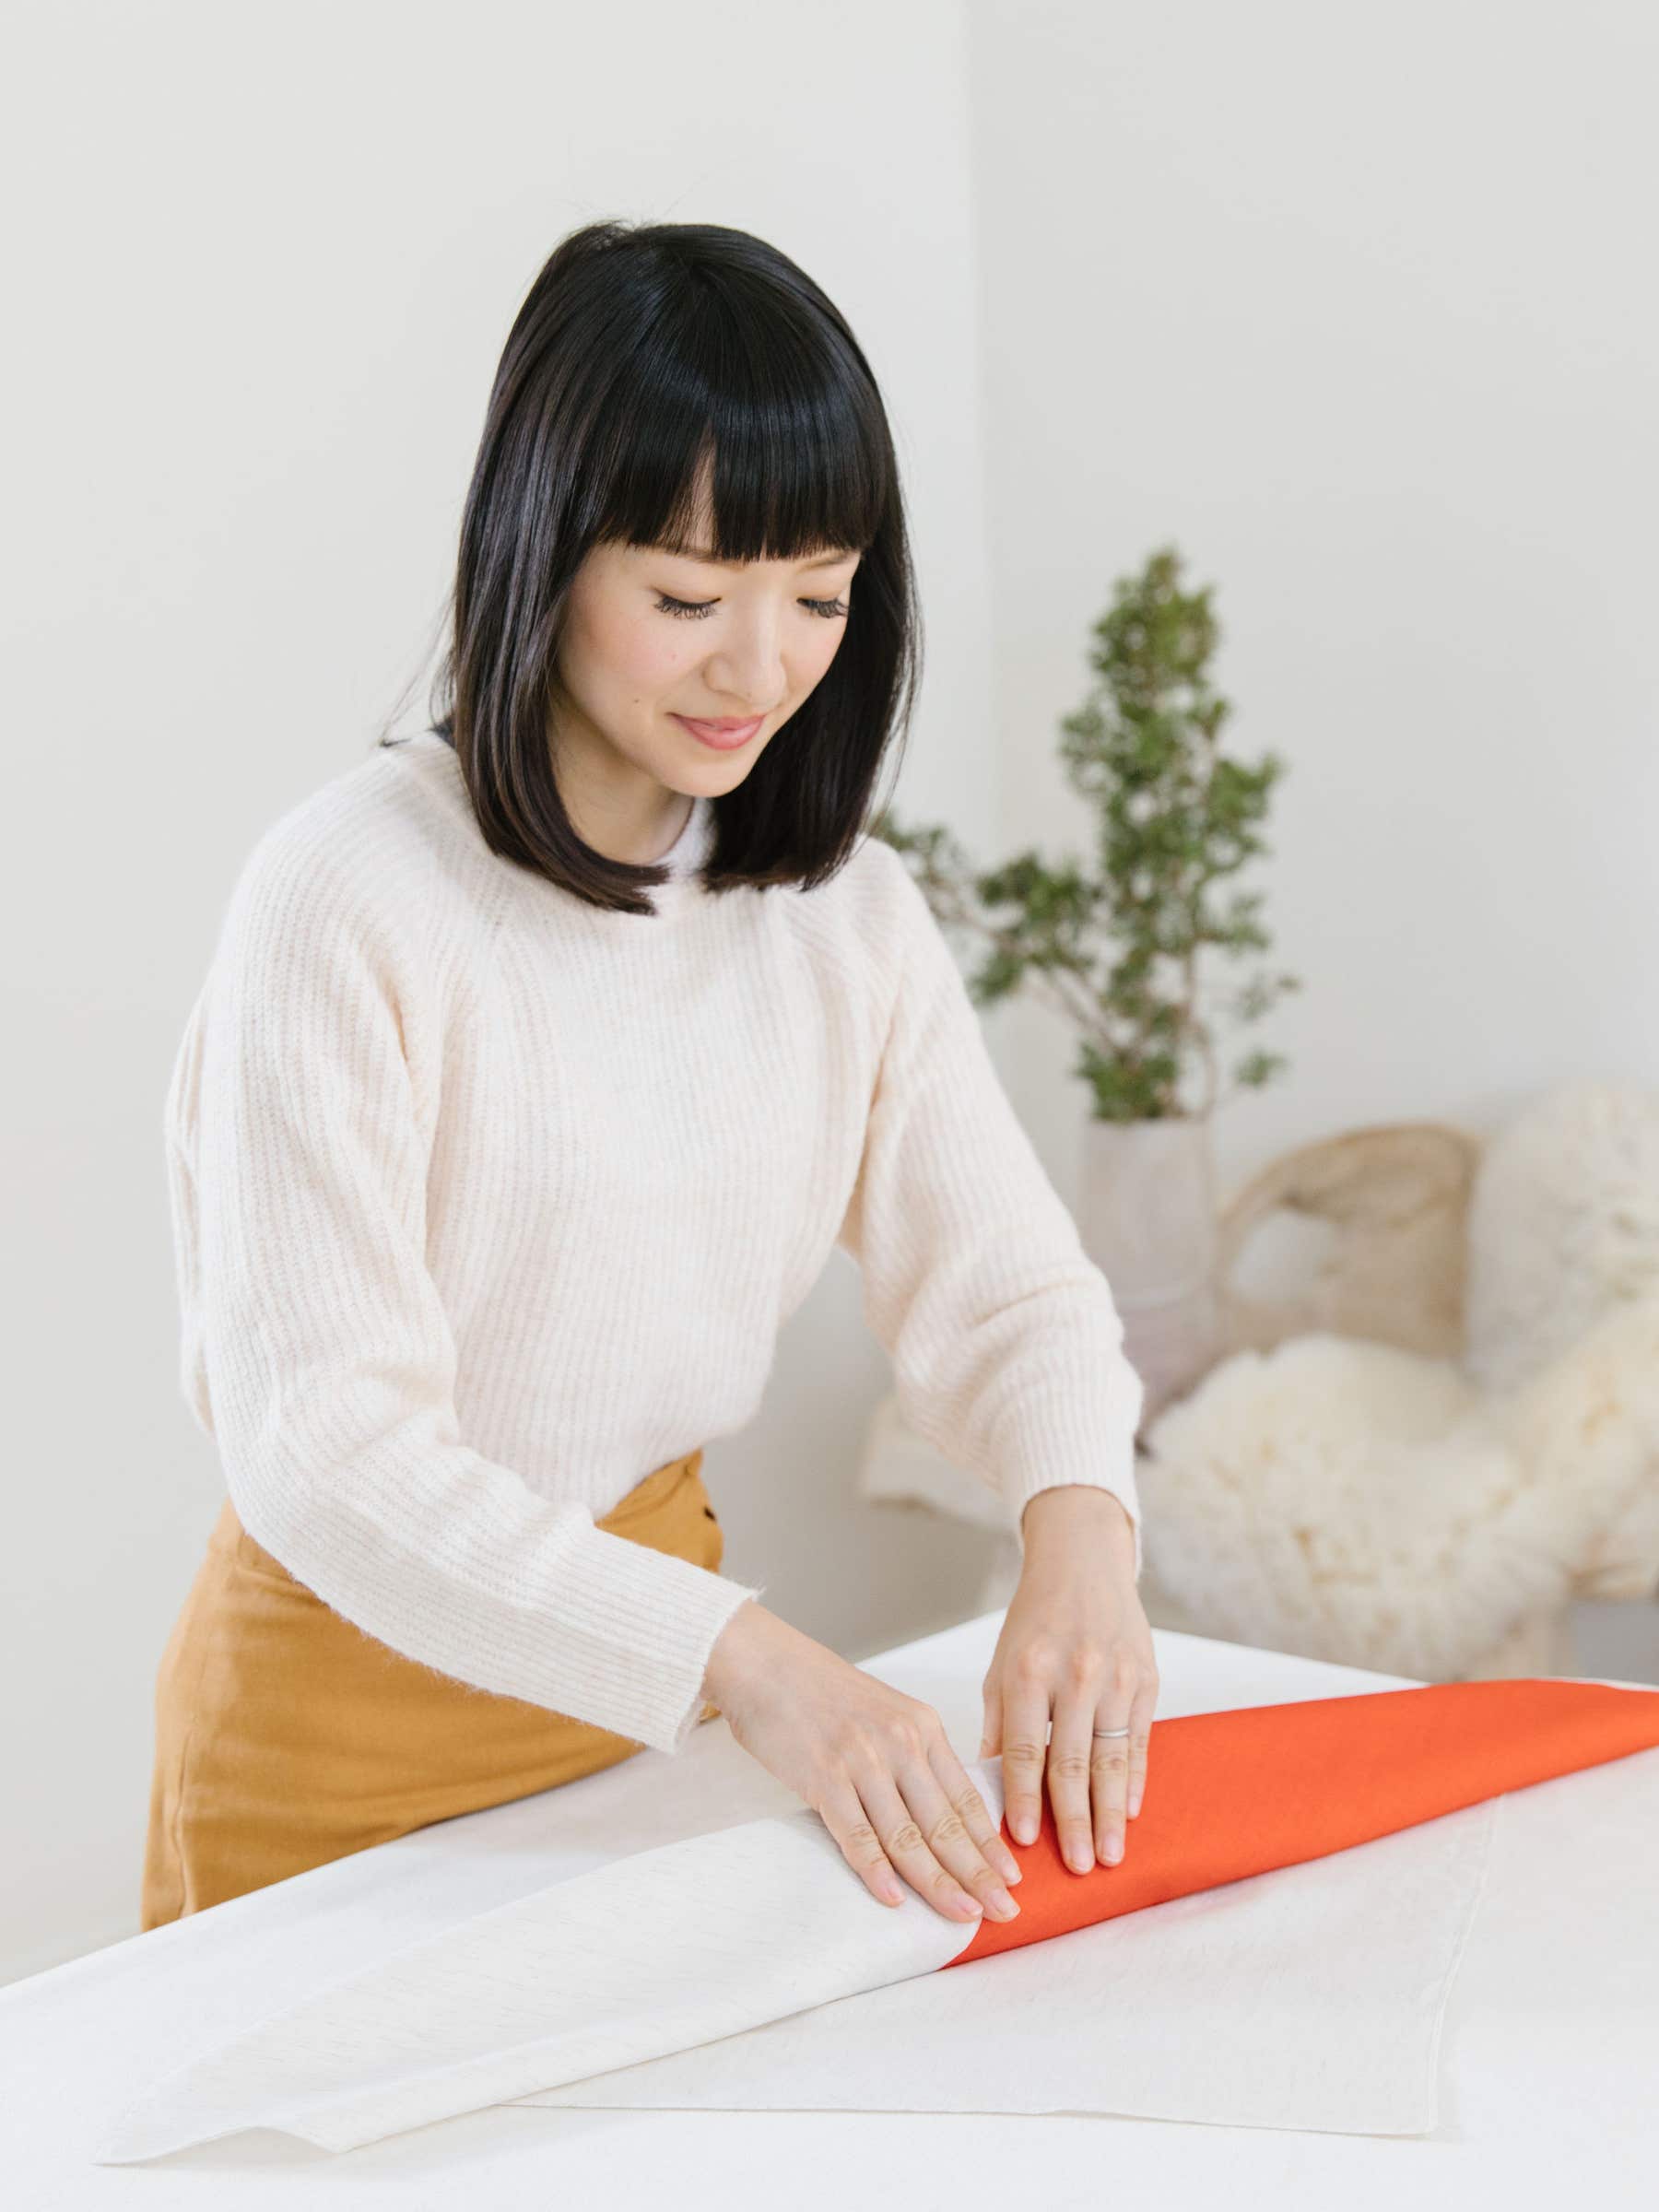 marie kondo wrapping gift